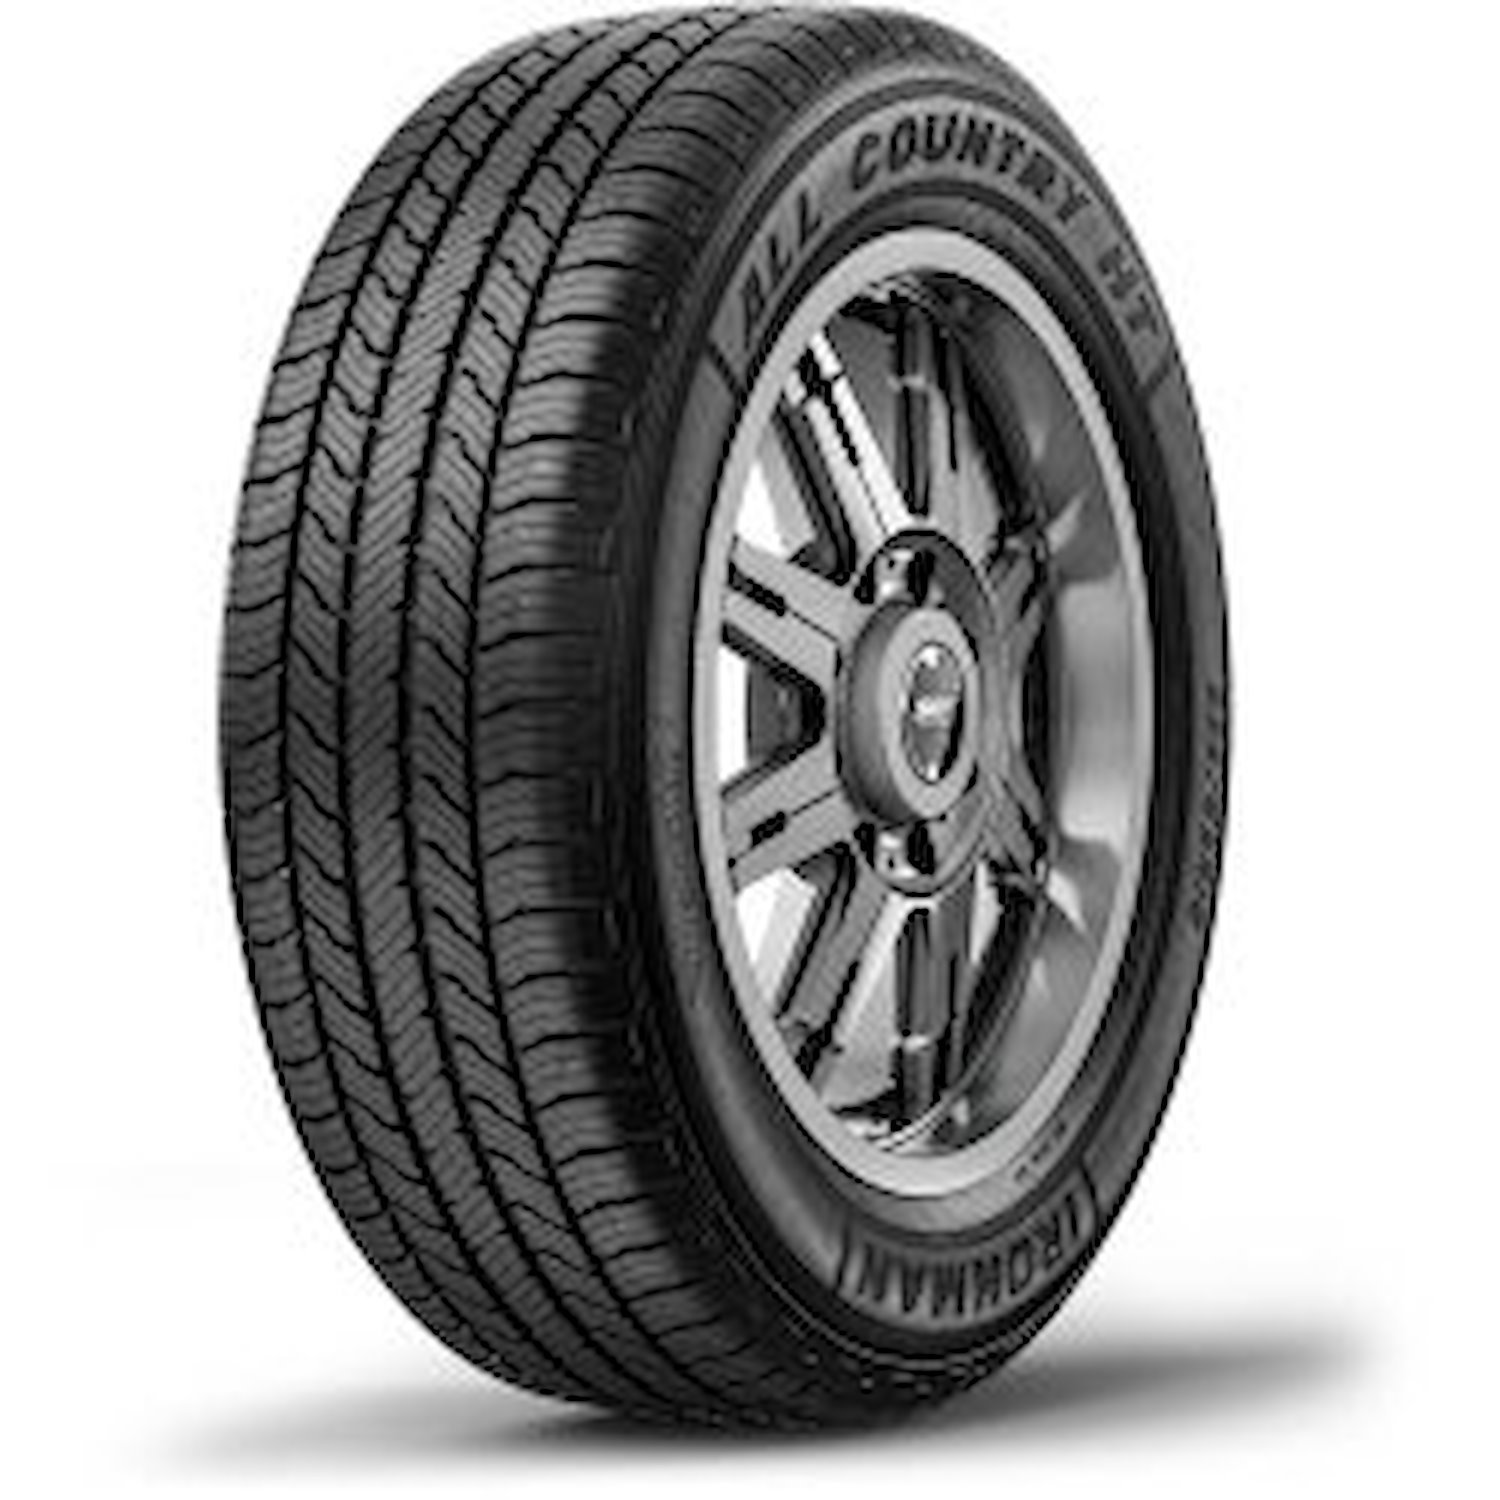 03067 All Country HT Tire, 225/75R16, 104T